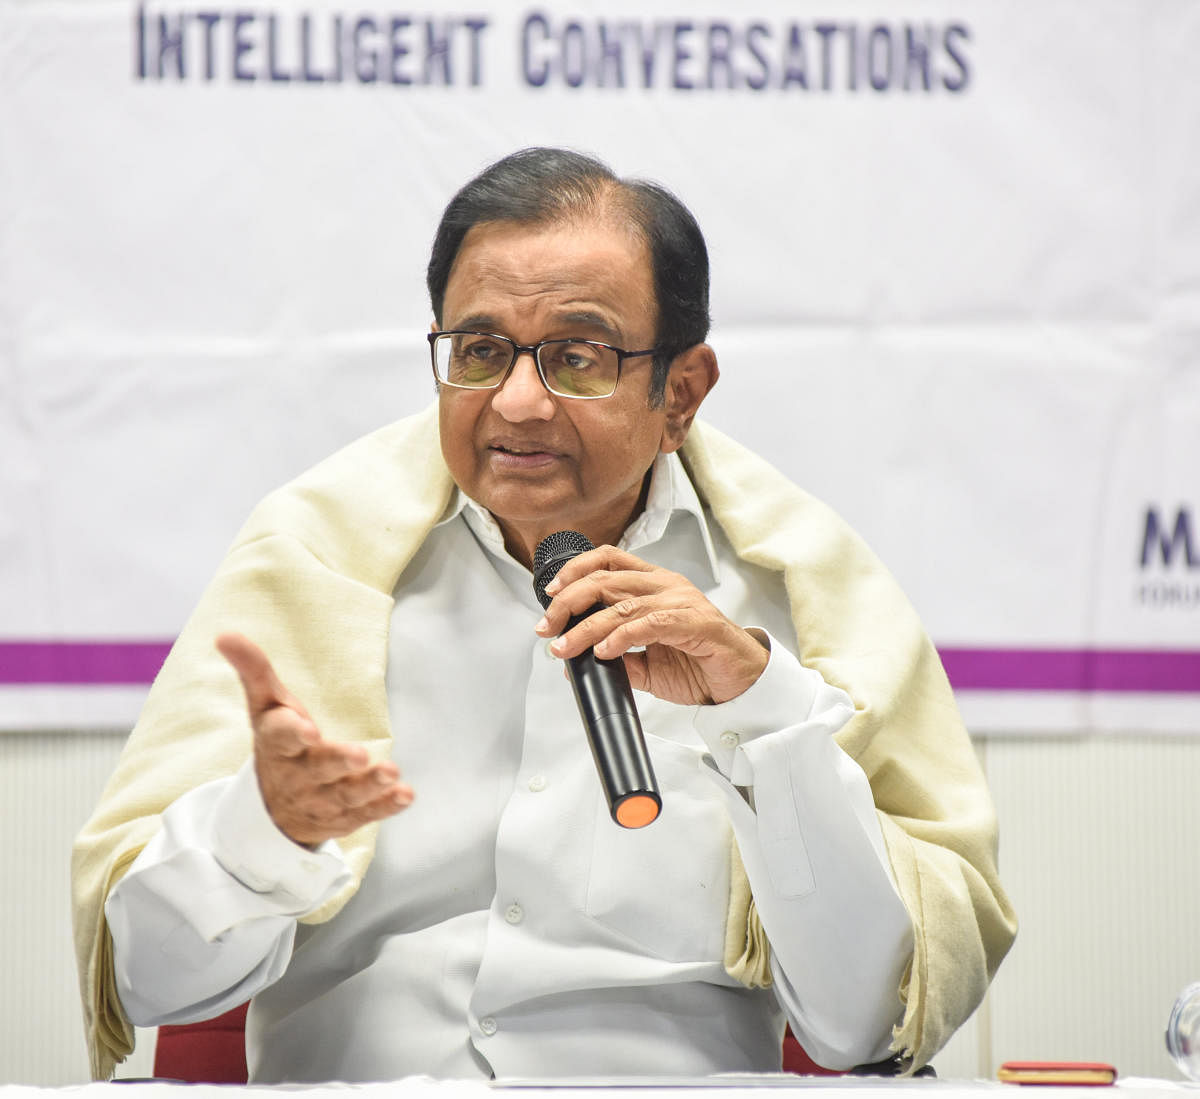 Chidambaram said he found two interesting ideas in the Budget — Credit Guarantee Enhancement Corporation and the plans to set up a nationwide gas grid and a water grid — but was unable to comment on it for lack of details.